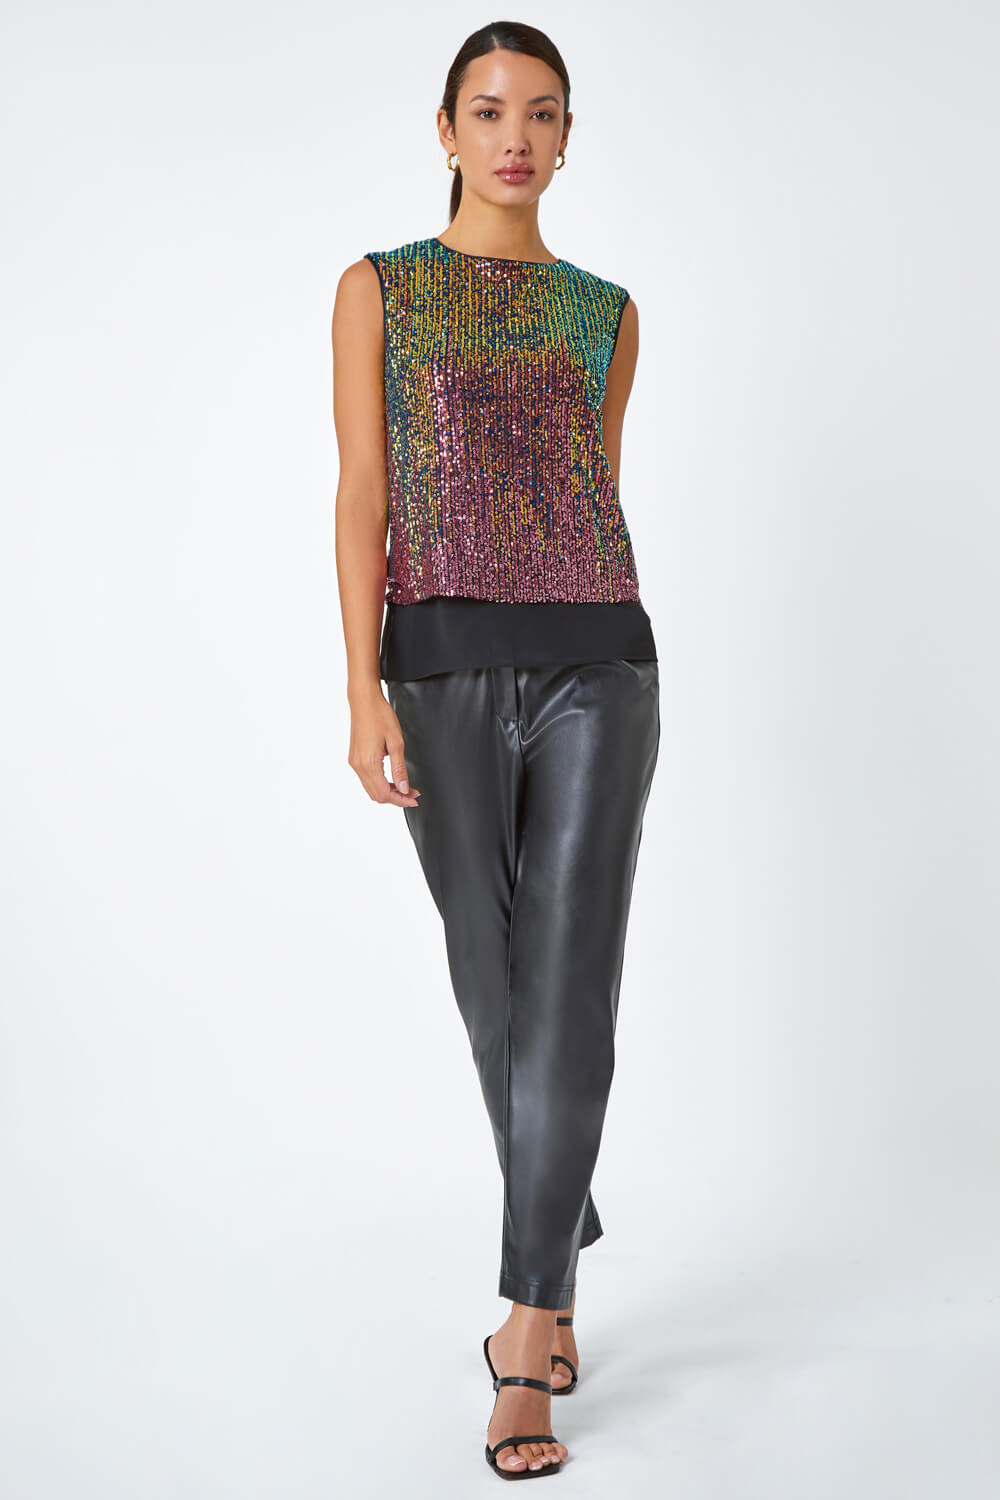 PINK Ombre Sequin Overlay Stretch Top, Image 2 of 7